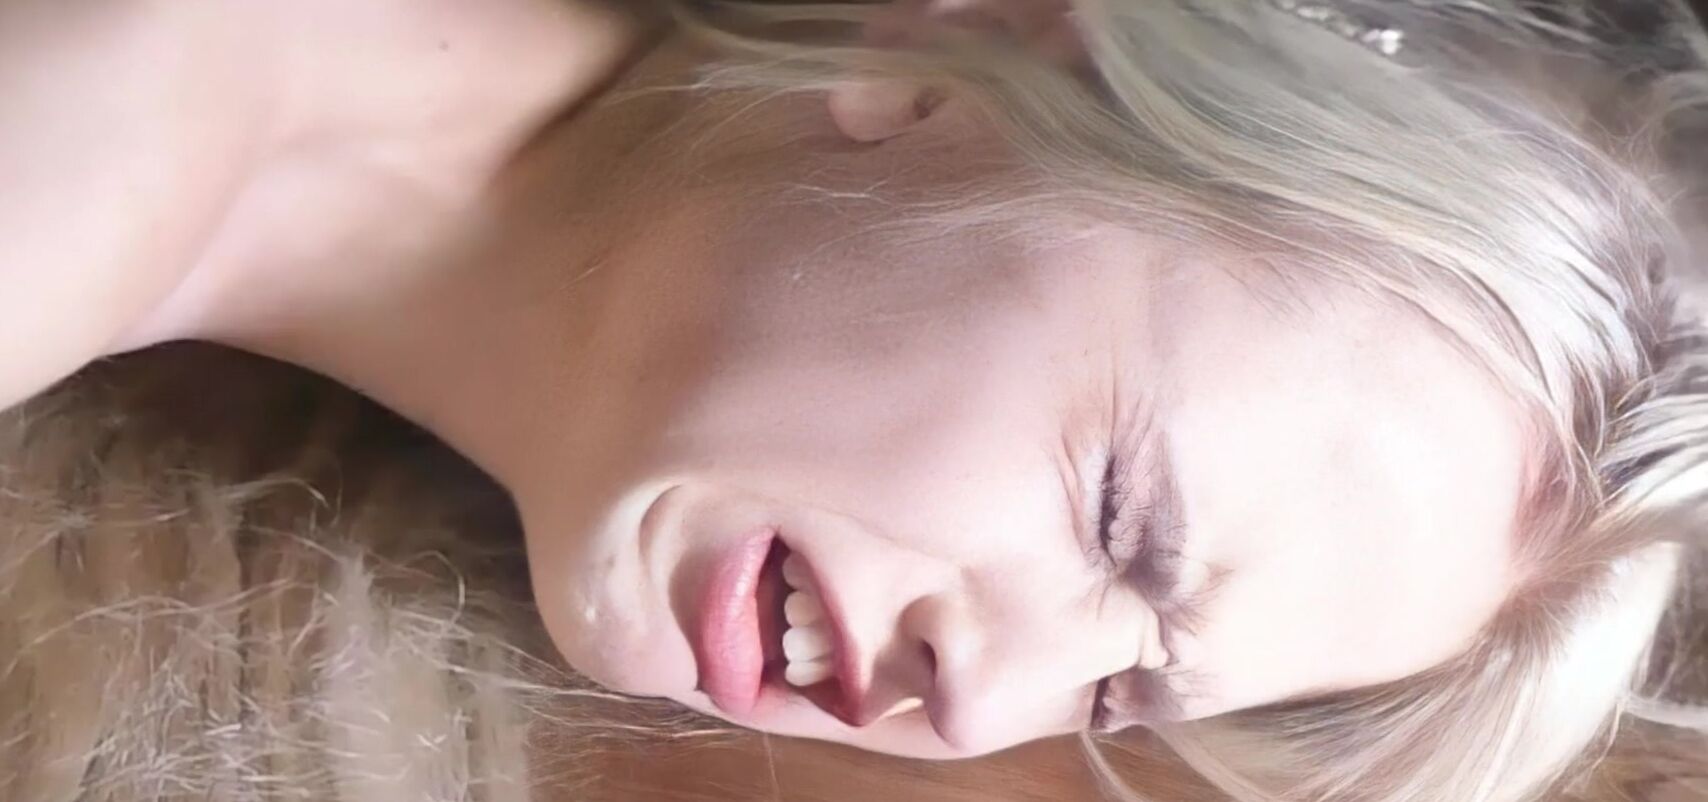 Blonde,Blond Hair And Blonde,Blond Hair NO LUBE ANAL WAS A BAD IDEA - 18 Yo Blonde Teen Can Hardly Take It (ROUGH PAINAL), Sexy Video Xxx Pic Hd